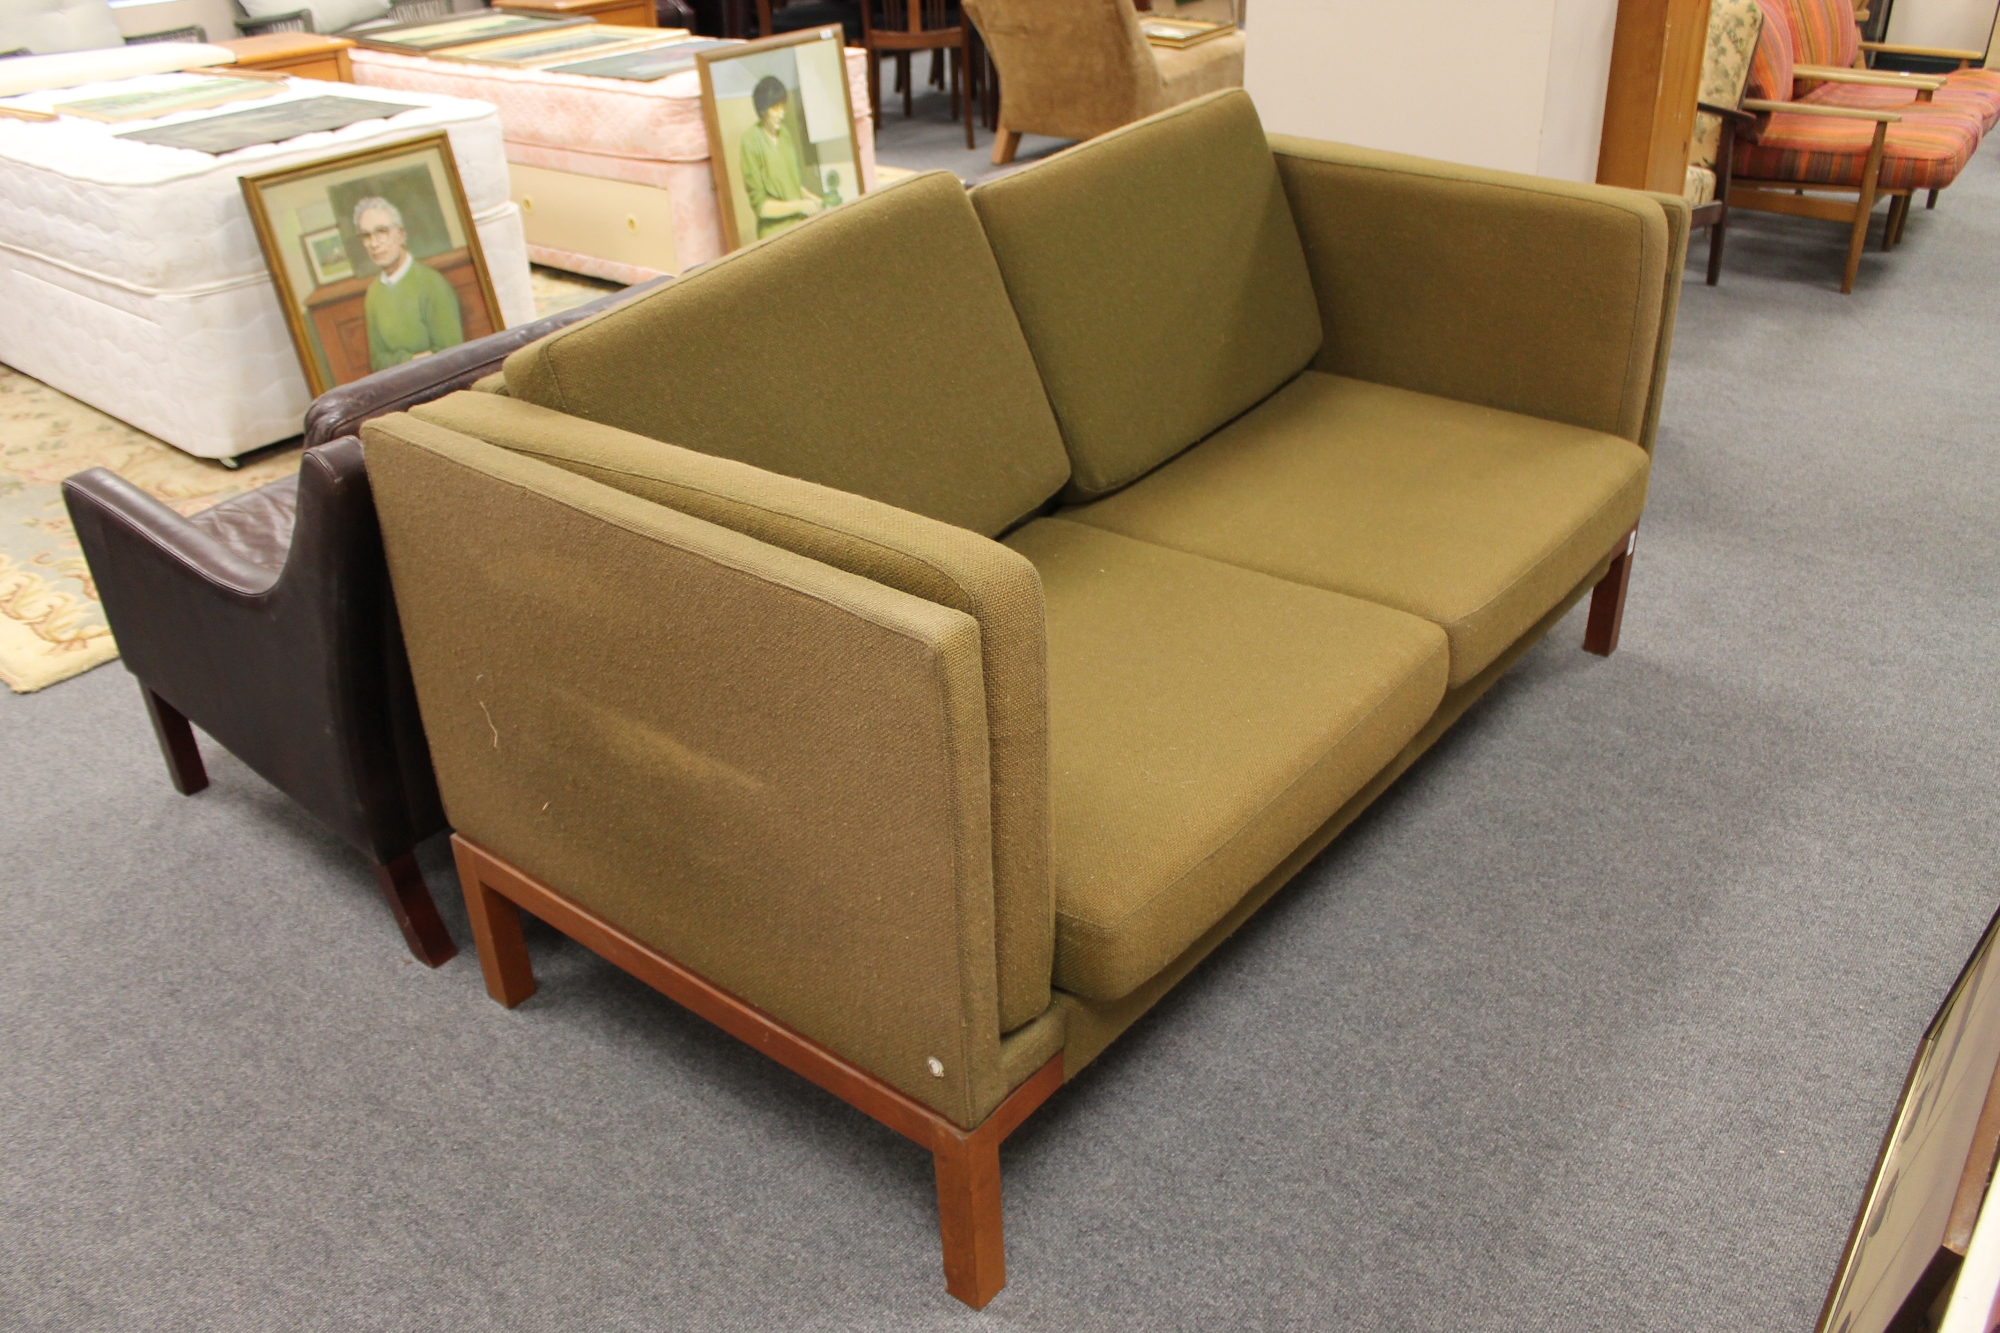 A mid 20th century Danish two seater settee in olive fabric on teak legs